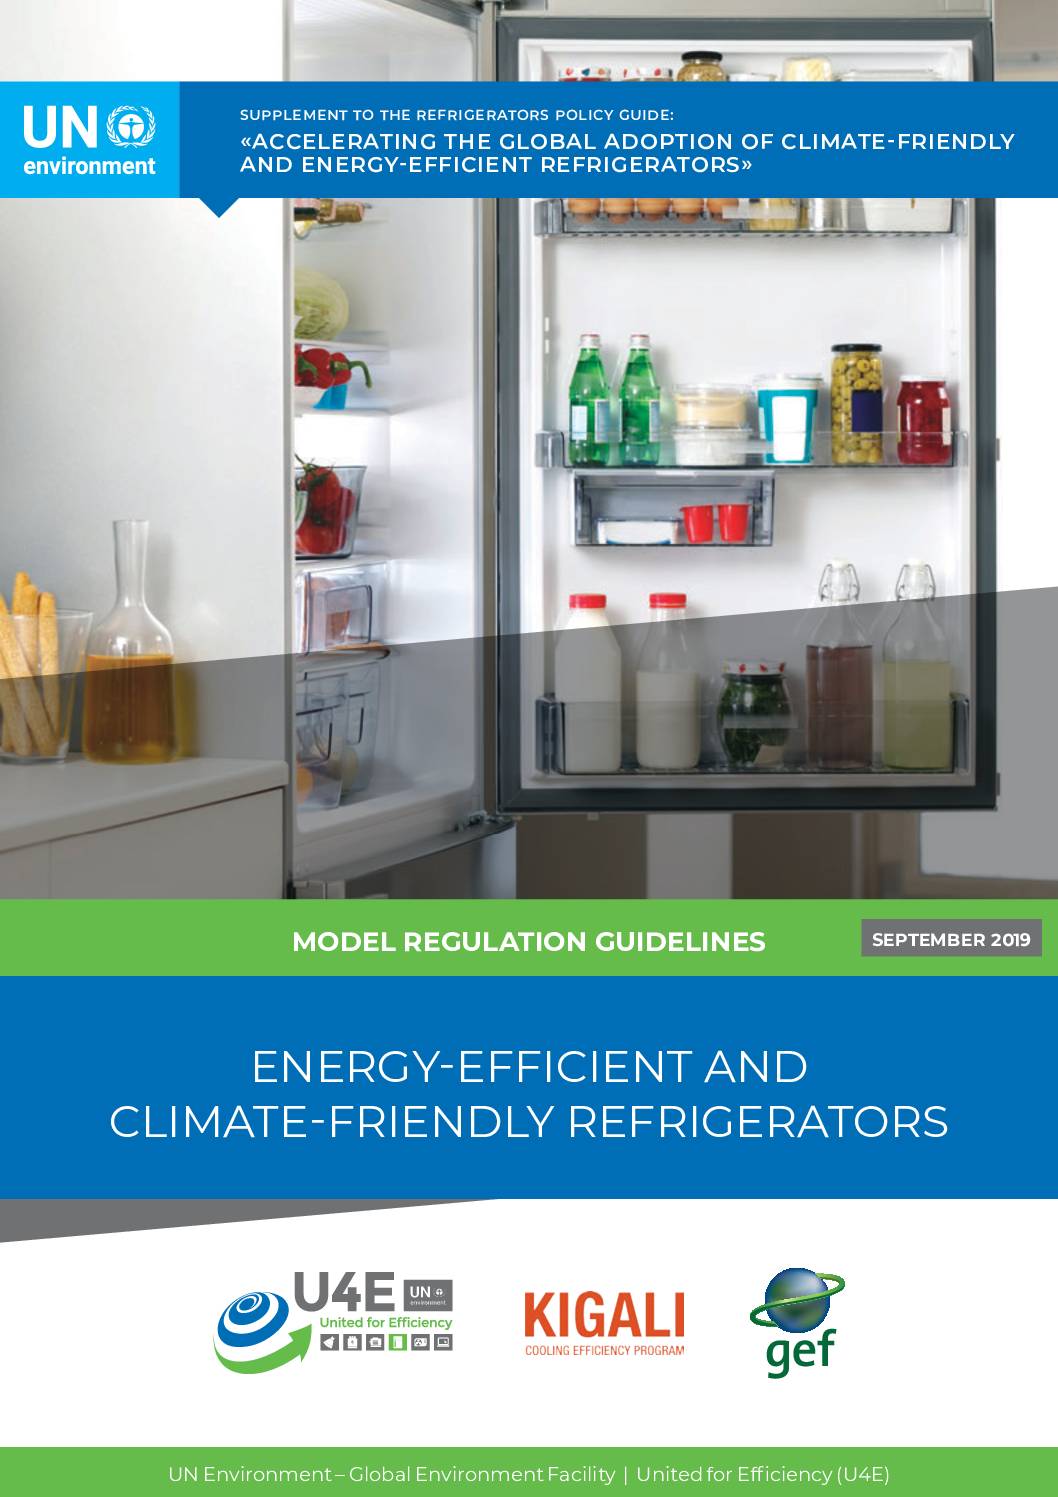 Model Regulation Guidelines For Energy-efficient And Climate-friendly Refrigerating Appliances